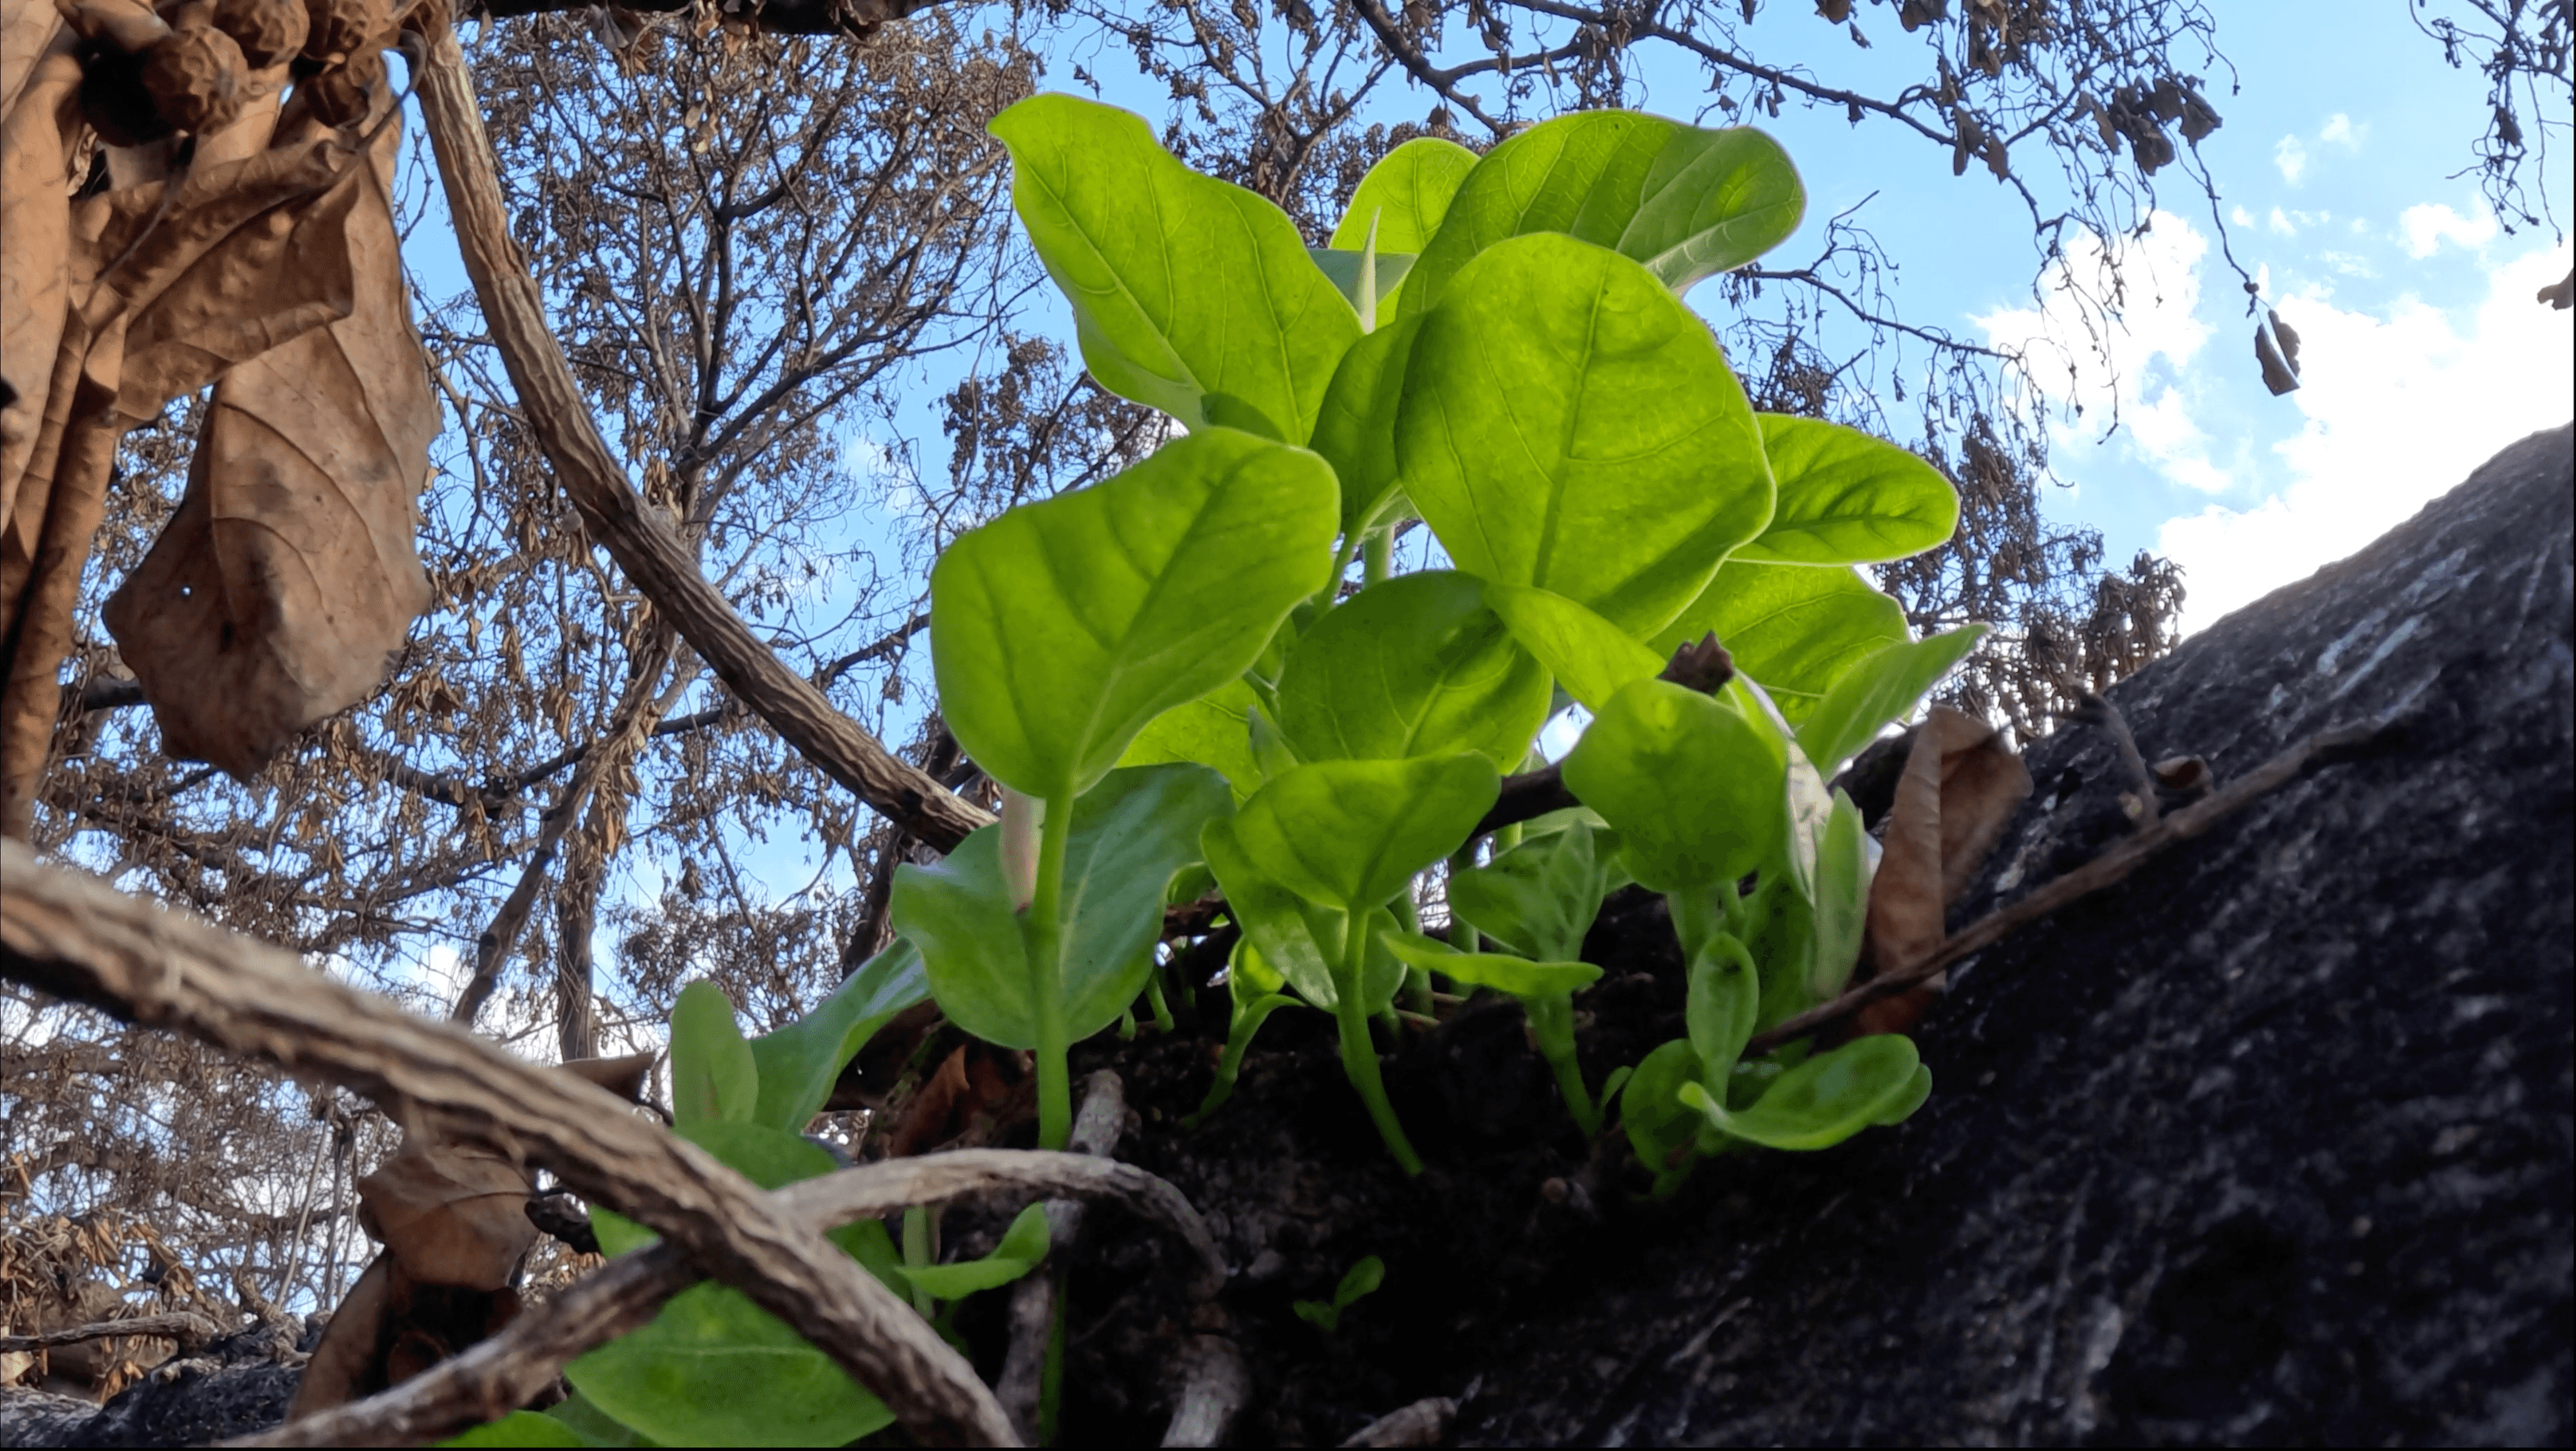 Lahaina Banyan Tree with New Sprouts